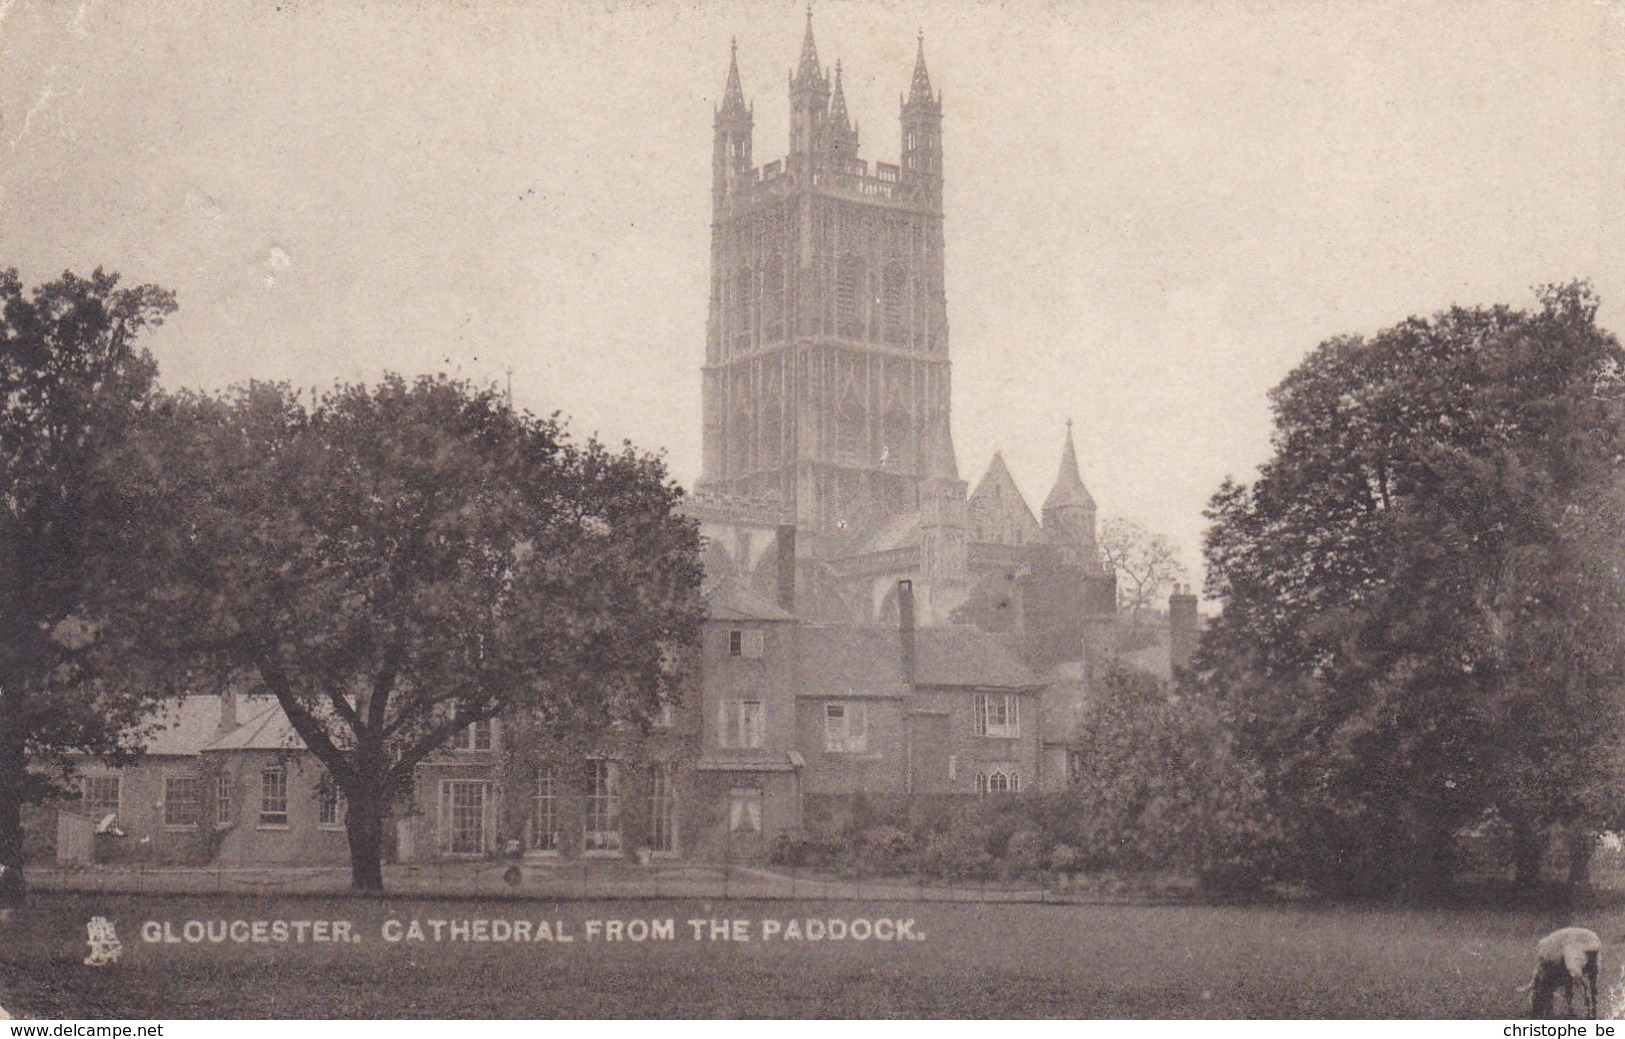 Gloucester, Cathedral From The Paddock (pk33510) - Gloucester